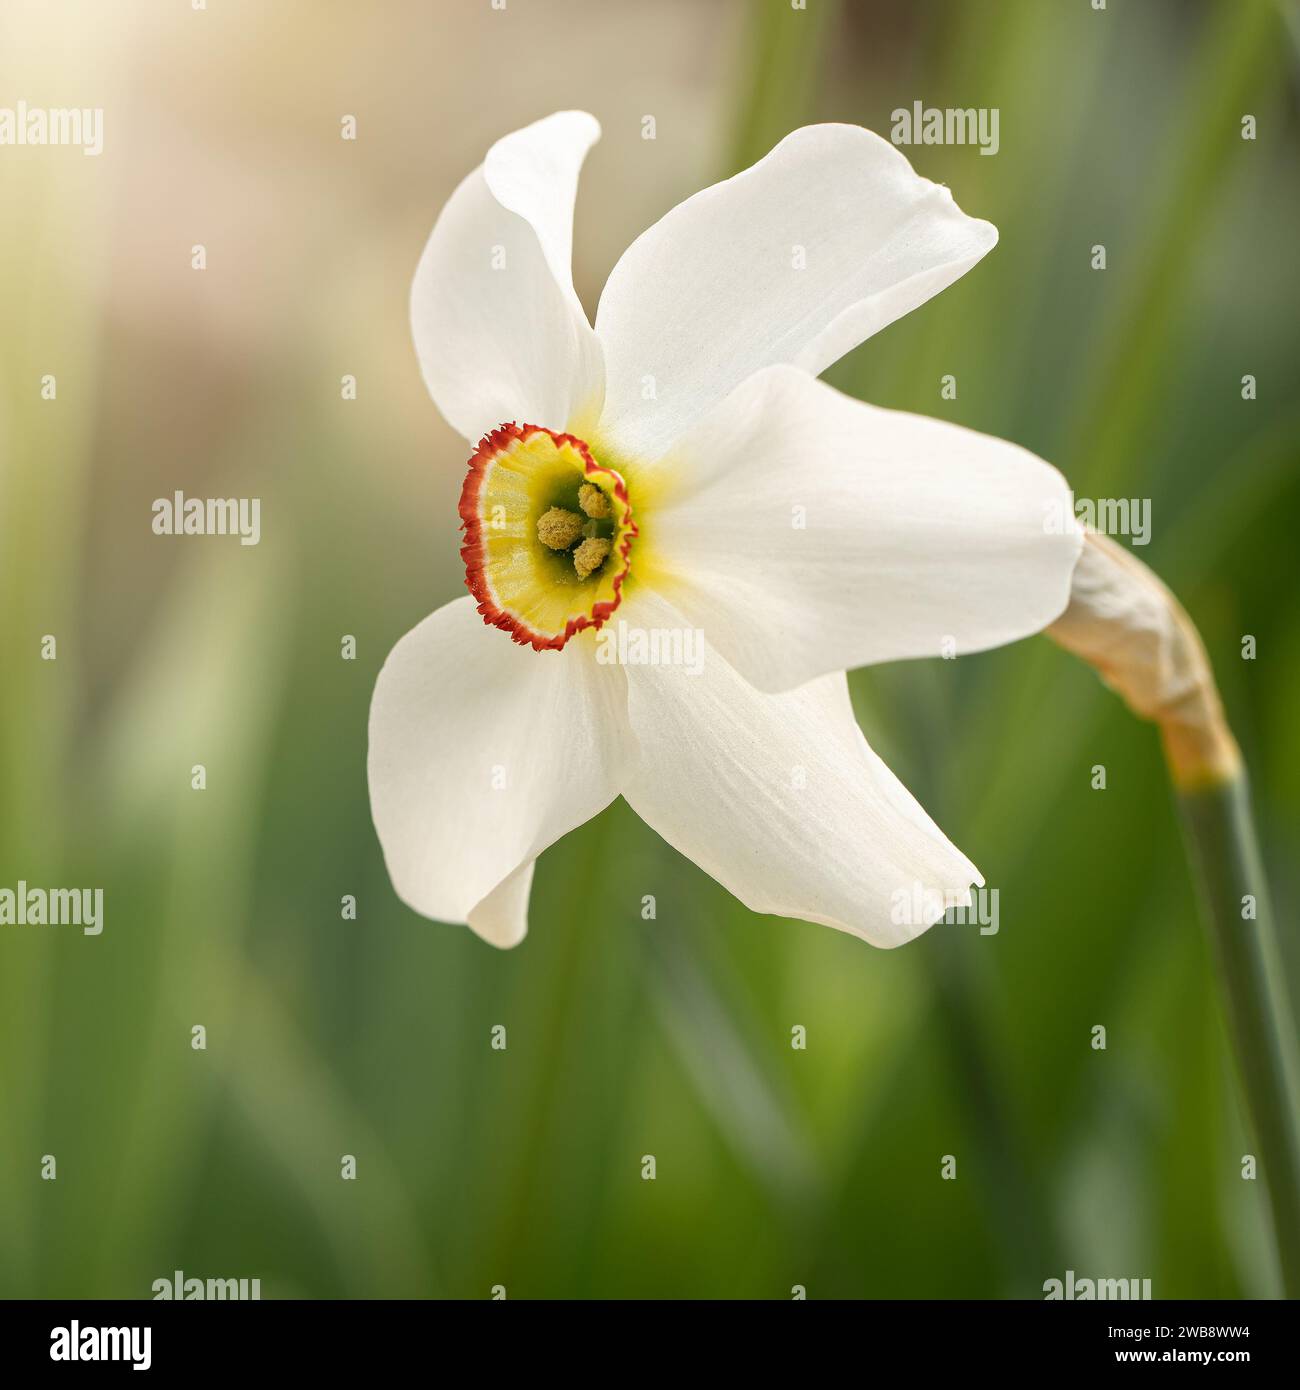 White daffodils, Poeticus daffodils, Narcissus poeticus Actaea, flowers in springtime. Blurred, bokeh background. Square photo. Stock Photo